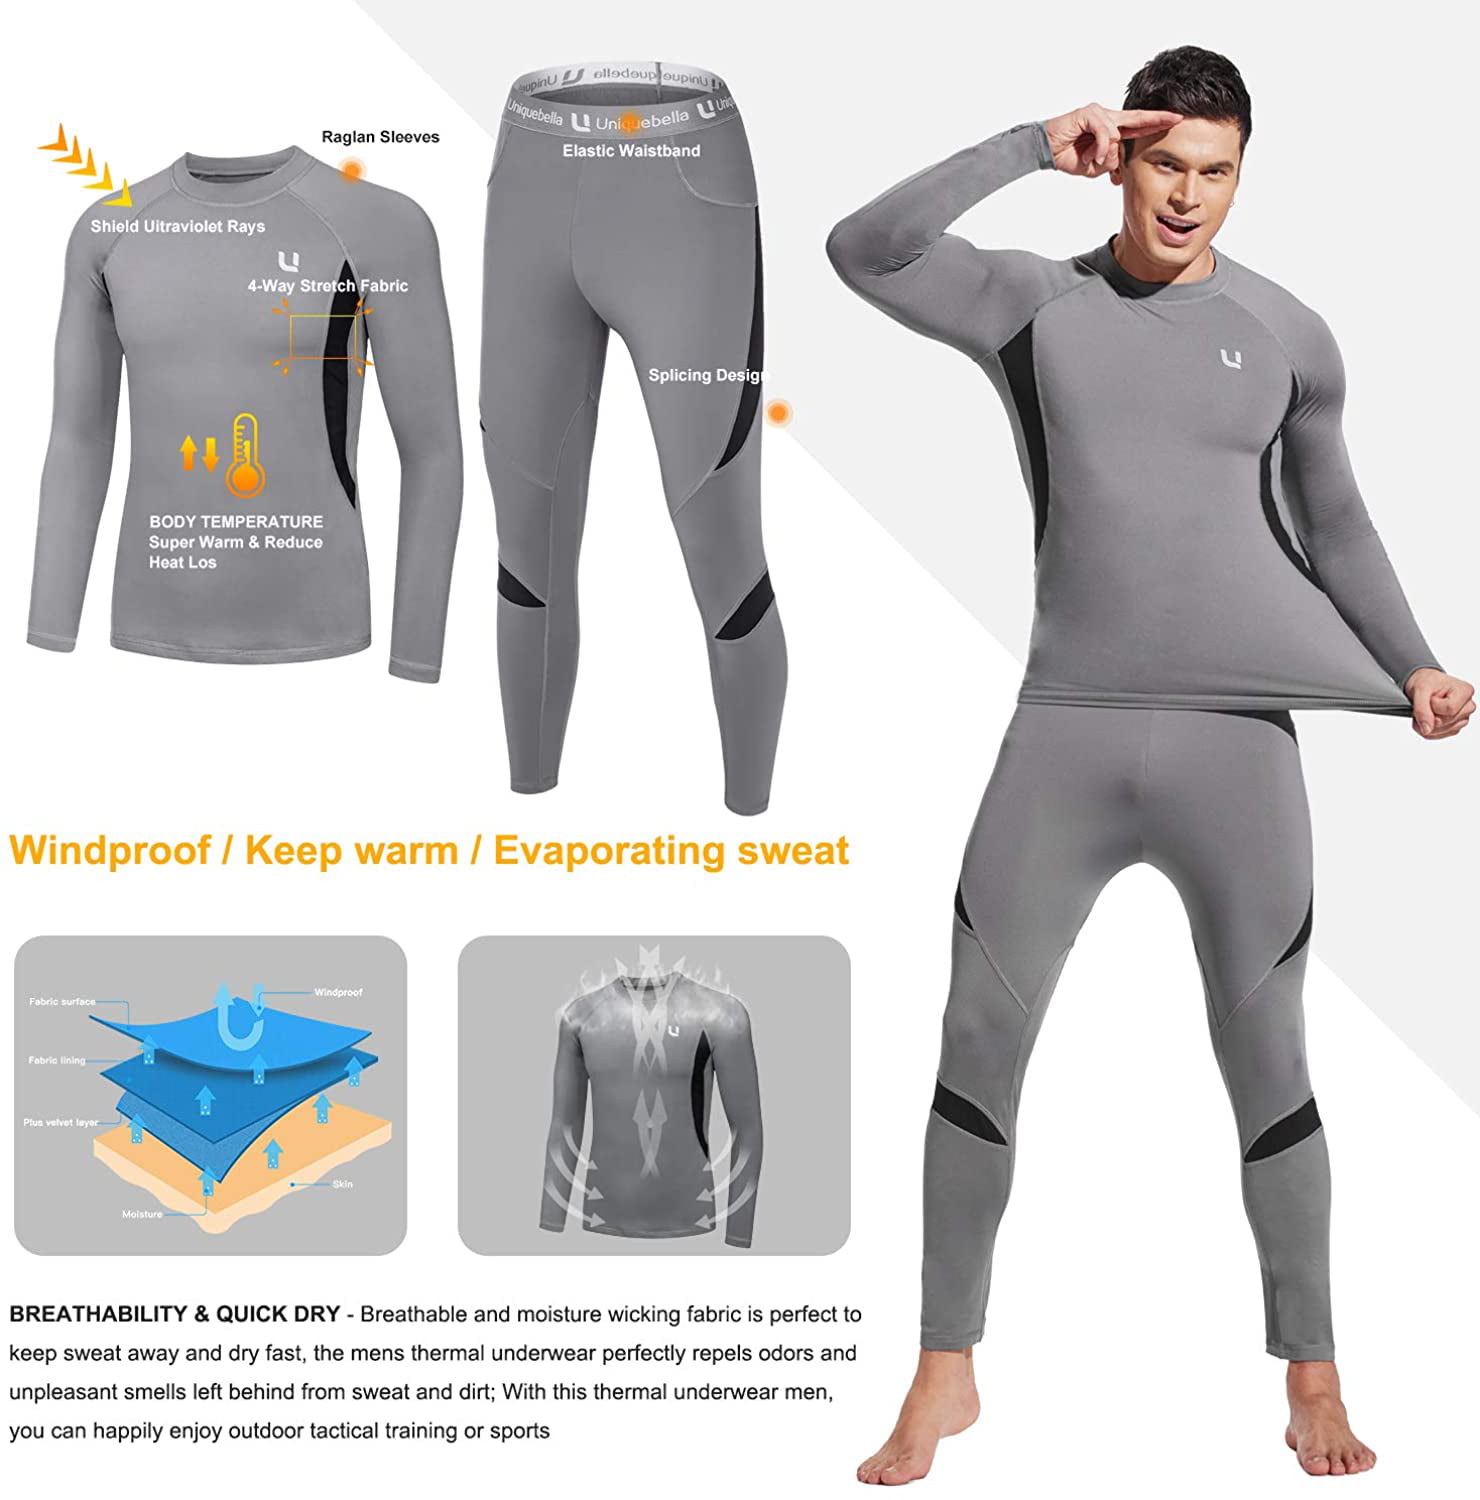 UNIQUEBELLA Thermal Underwear Men Set Long Sleeve Tops Long Johns Thermal Base Layer Bottom Fleece Lined Quick Drying for Workout Skiing Running Hiking 